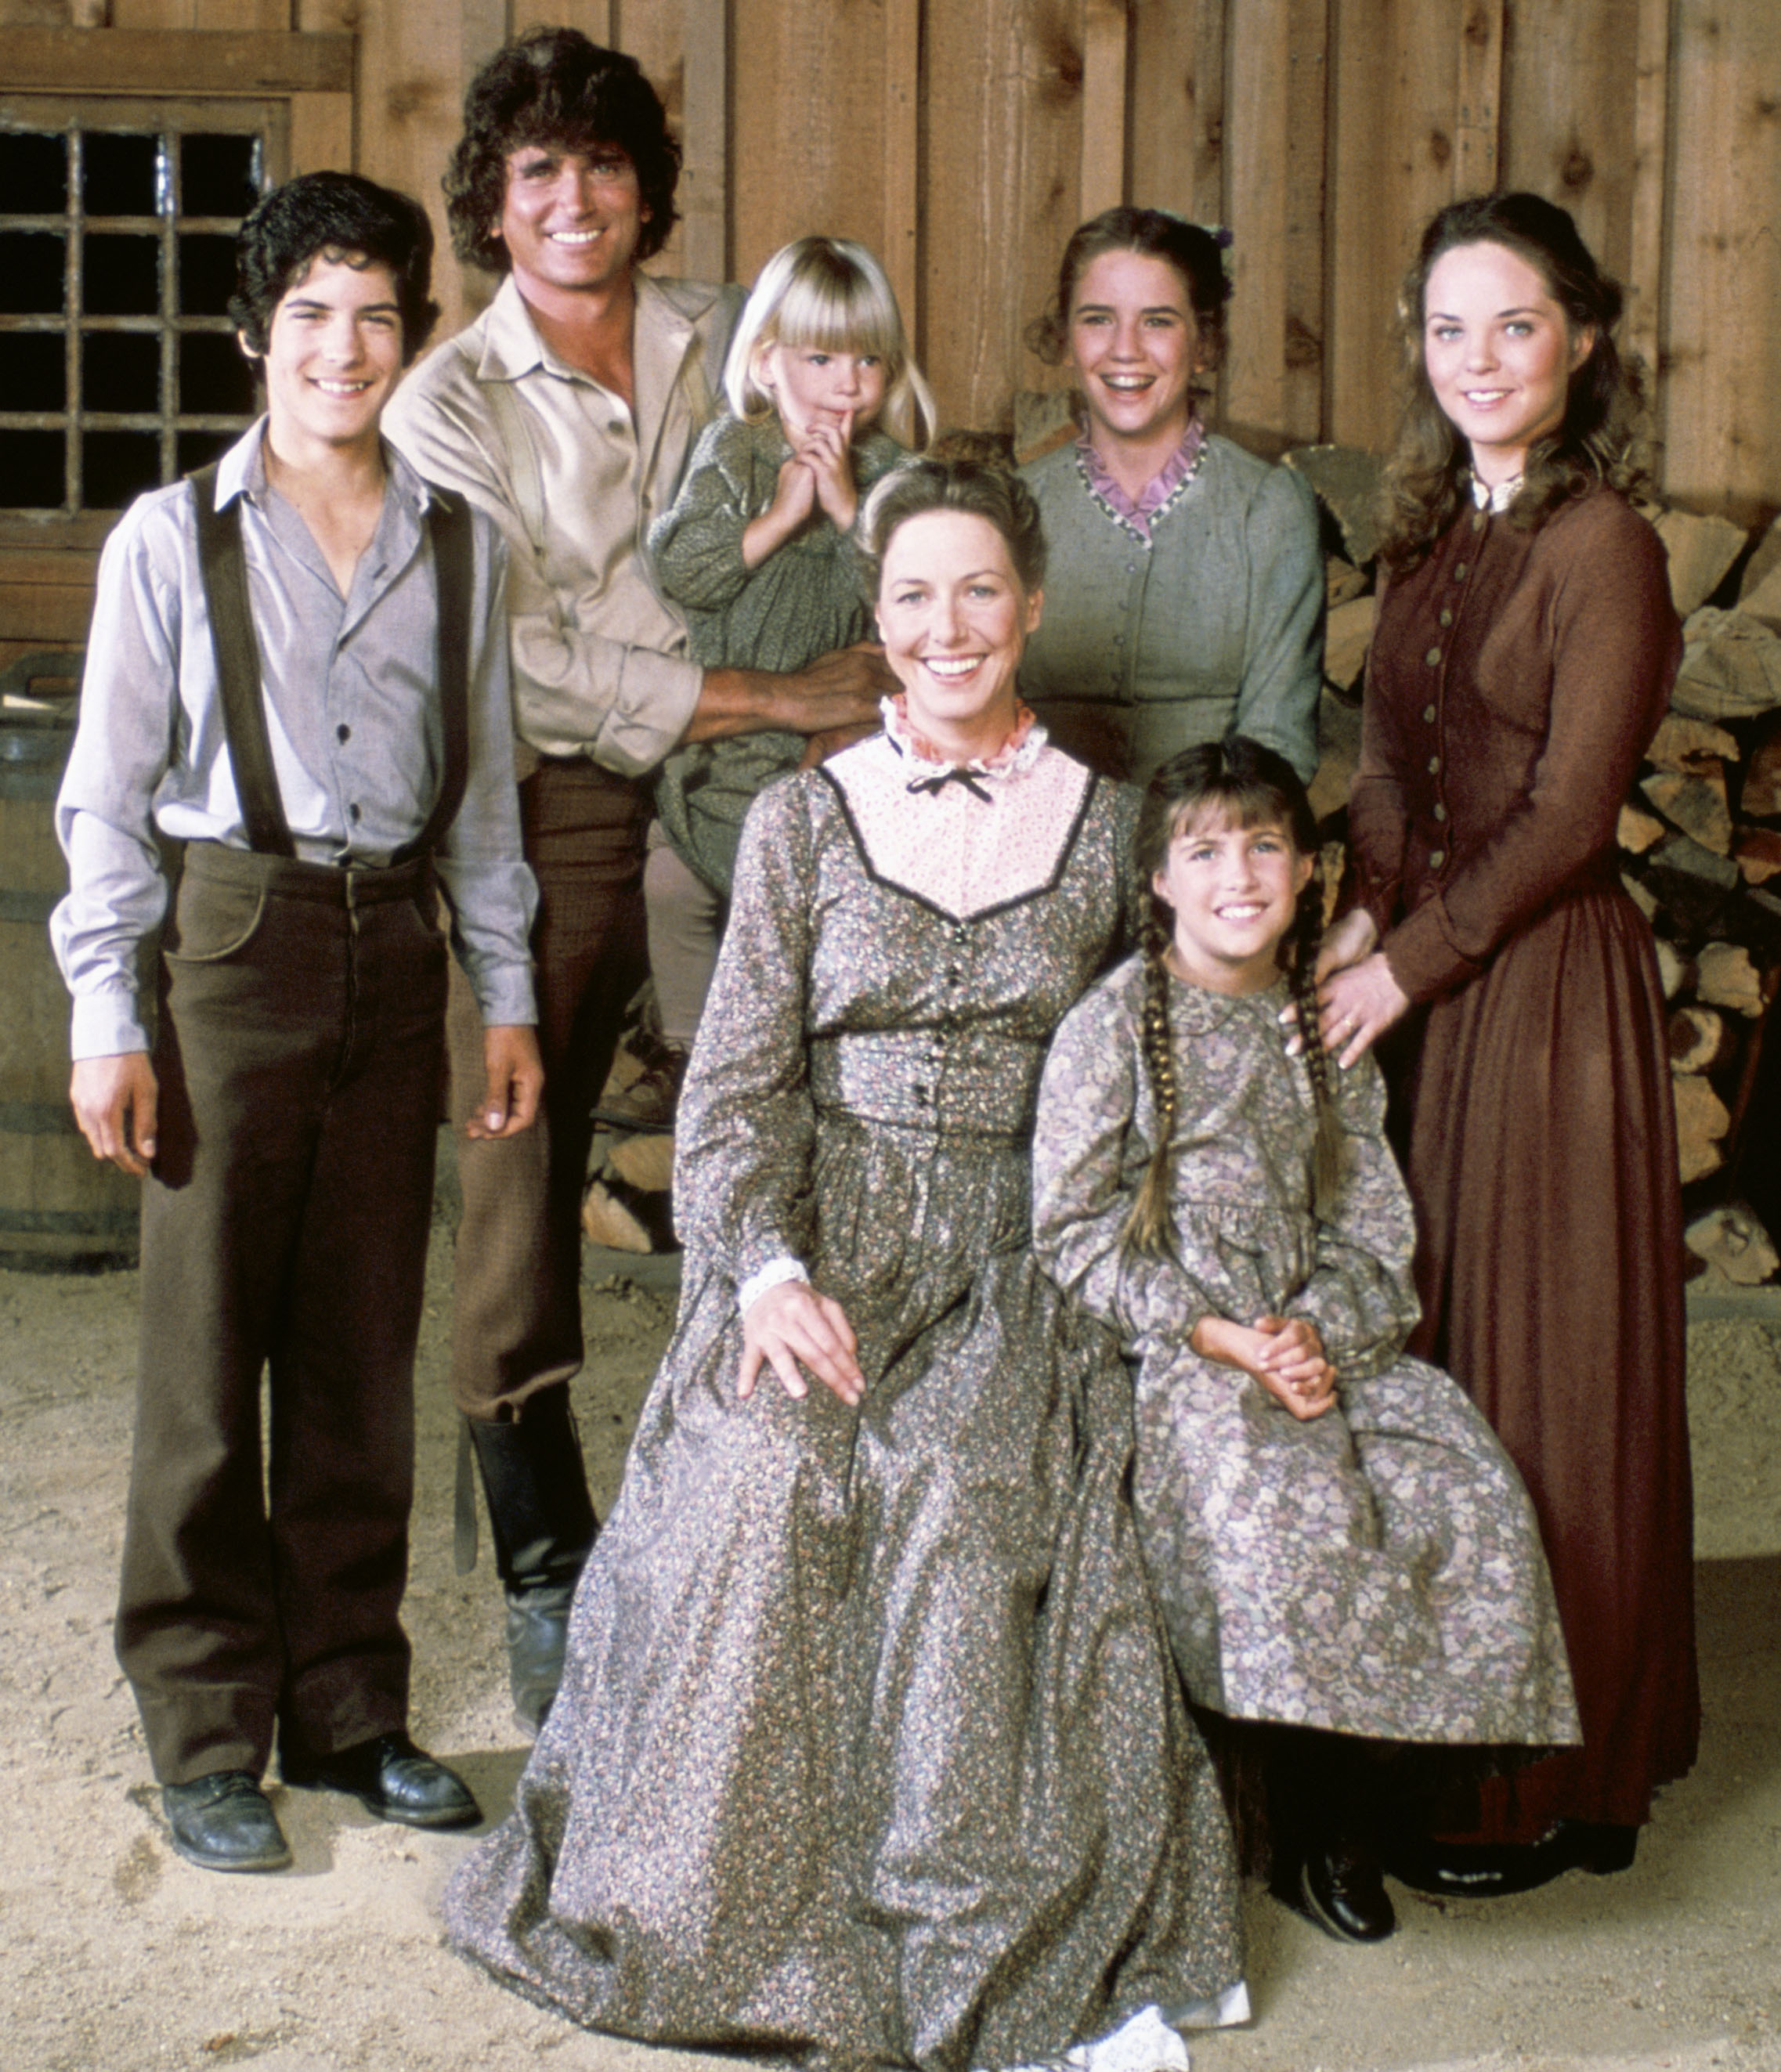 little house on the prairie complete collection fye